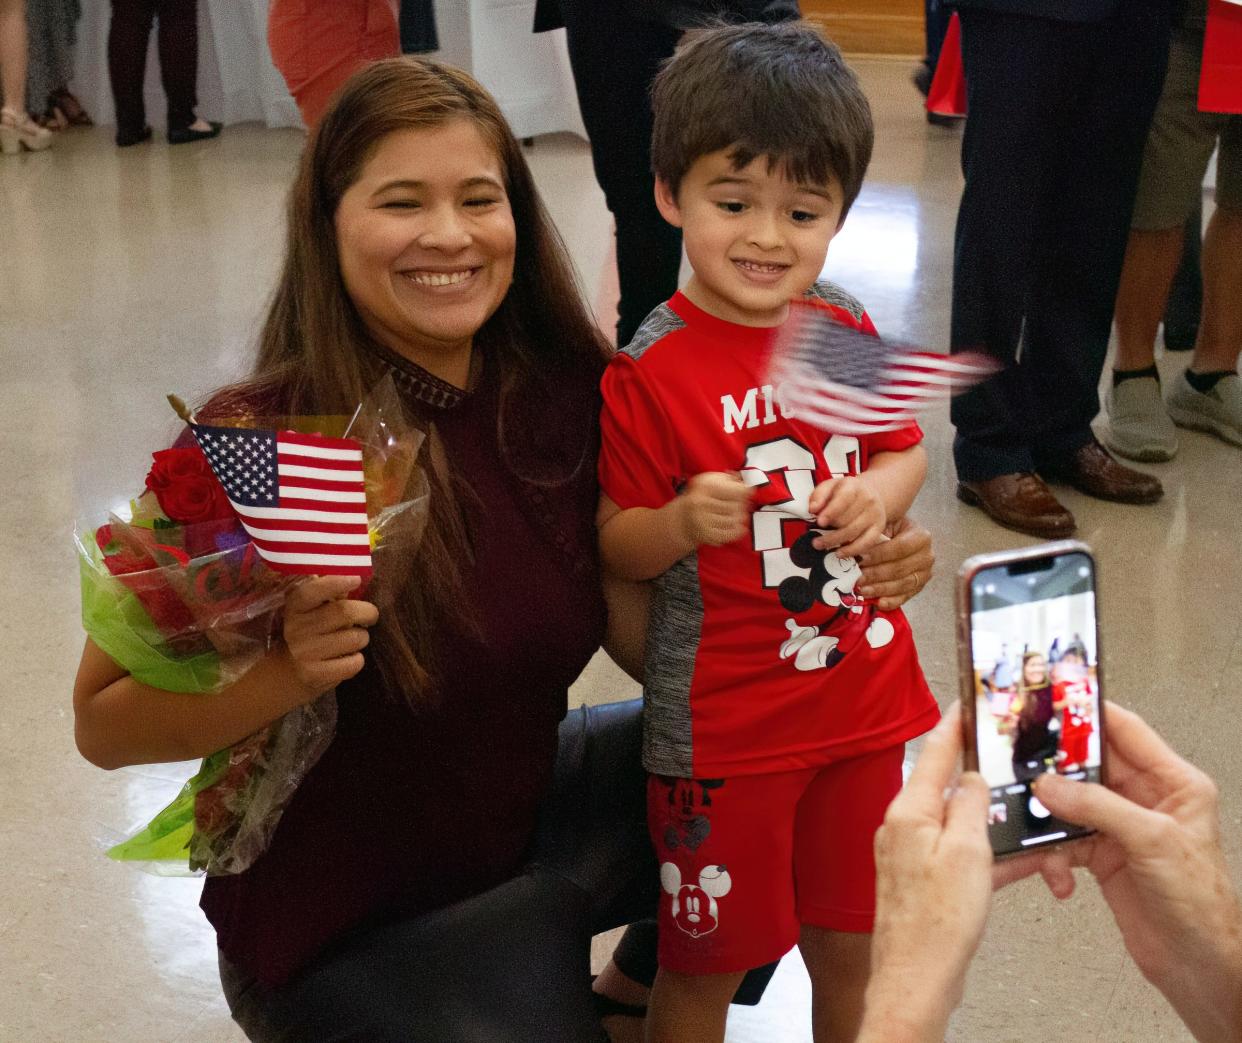 Melissa Baker of Davenport, an immigrant from Colombia, poses with her son, Adrian, after participating in a naturalization  ceremony Friday morning at the Polk History Center in Bartow. More than 60 immigrants gained citizenship in two ceremonies.